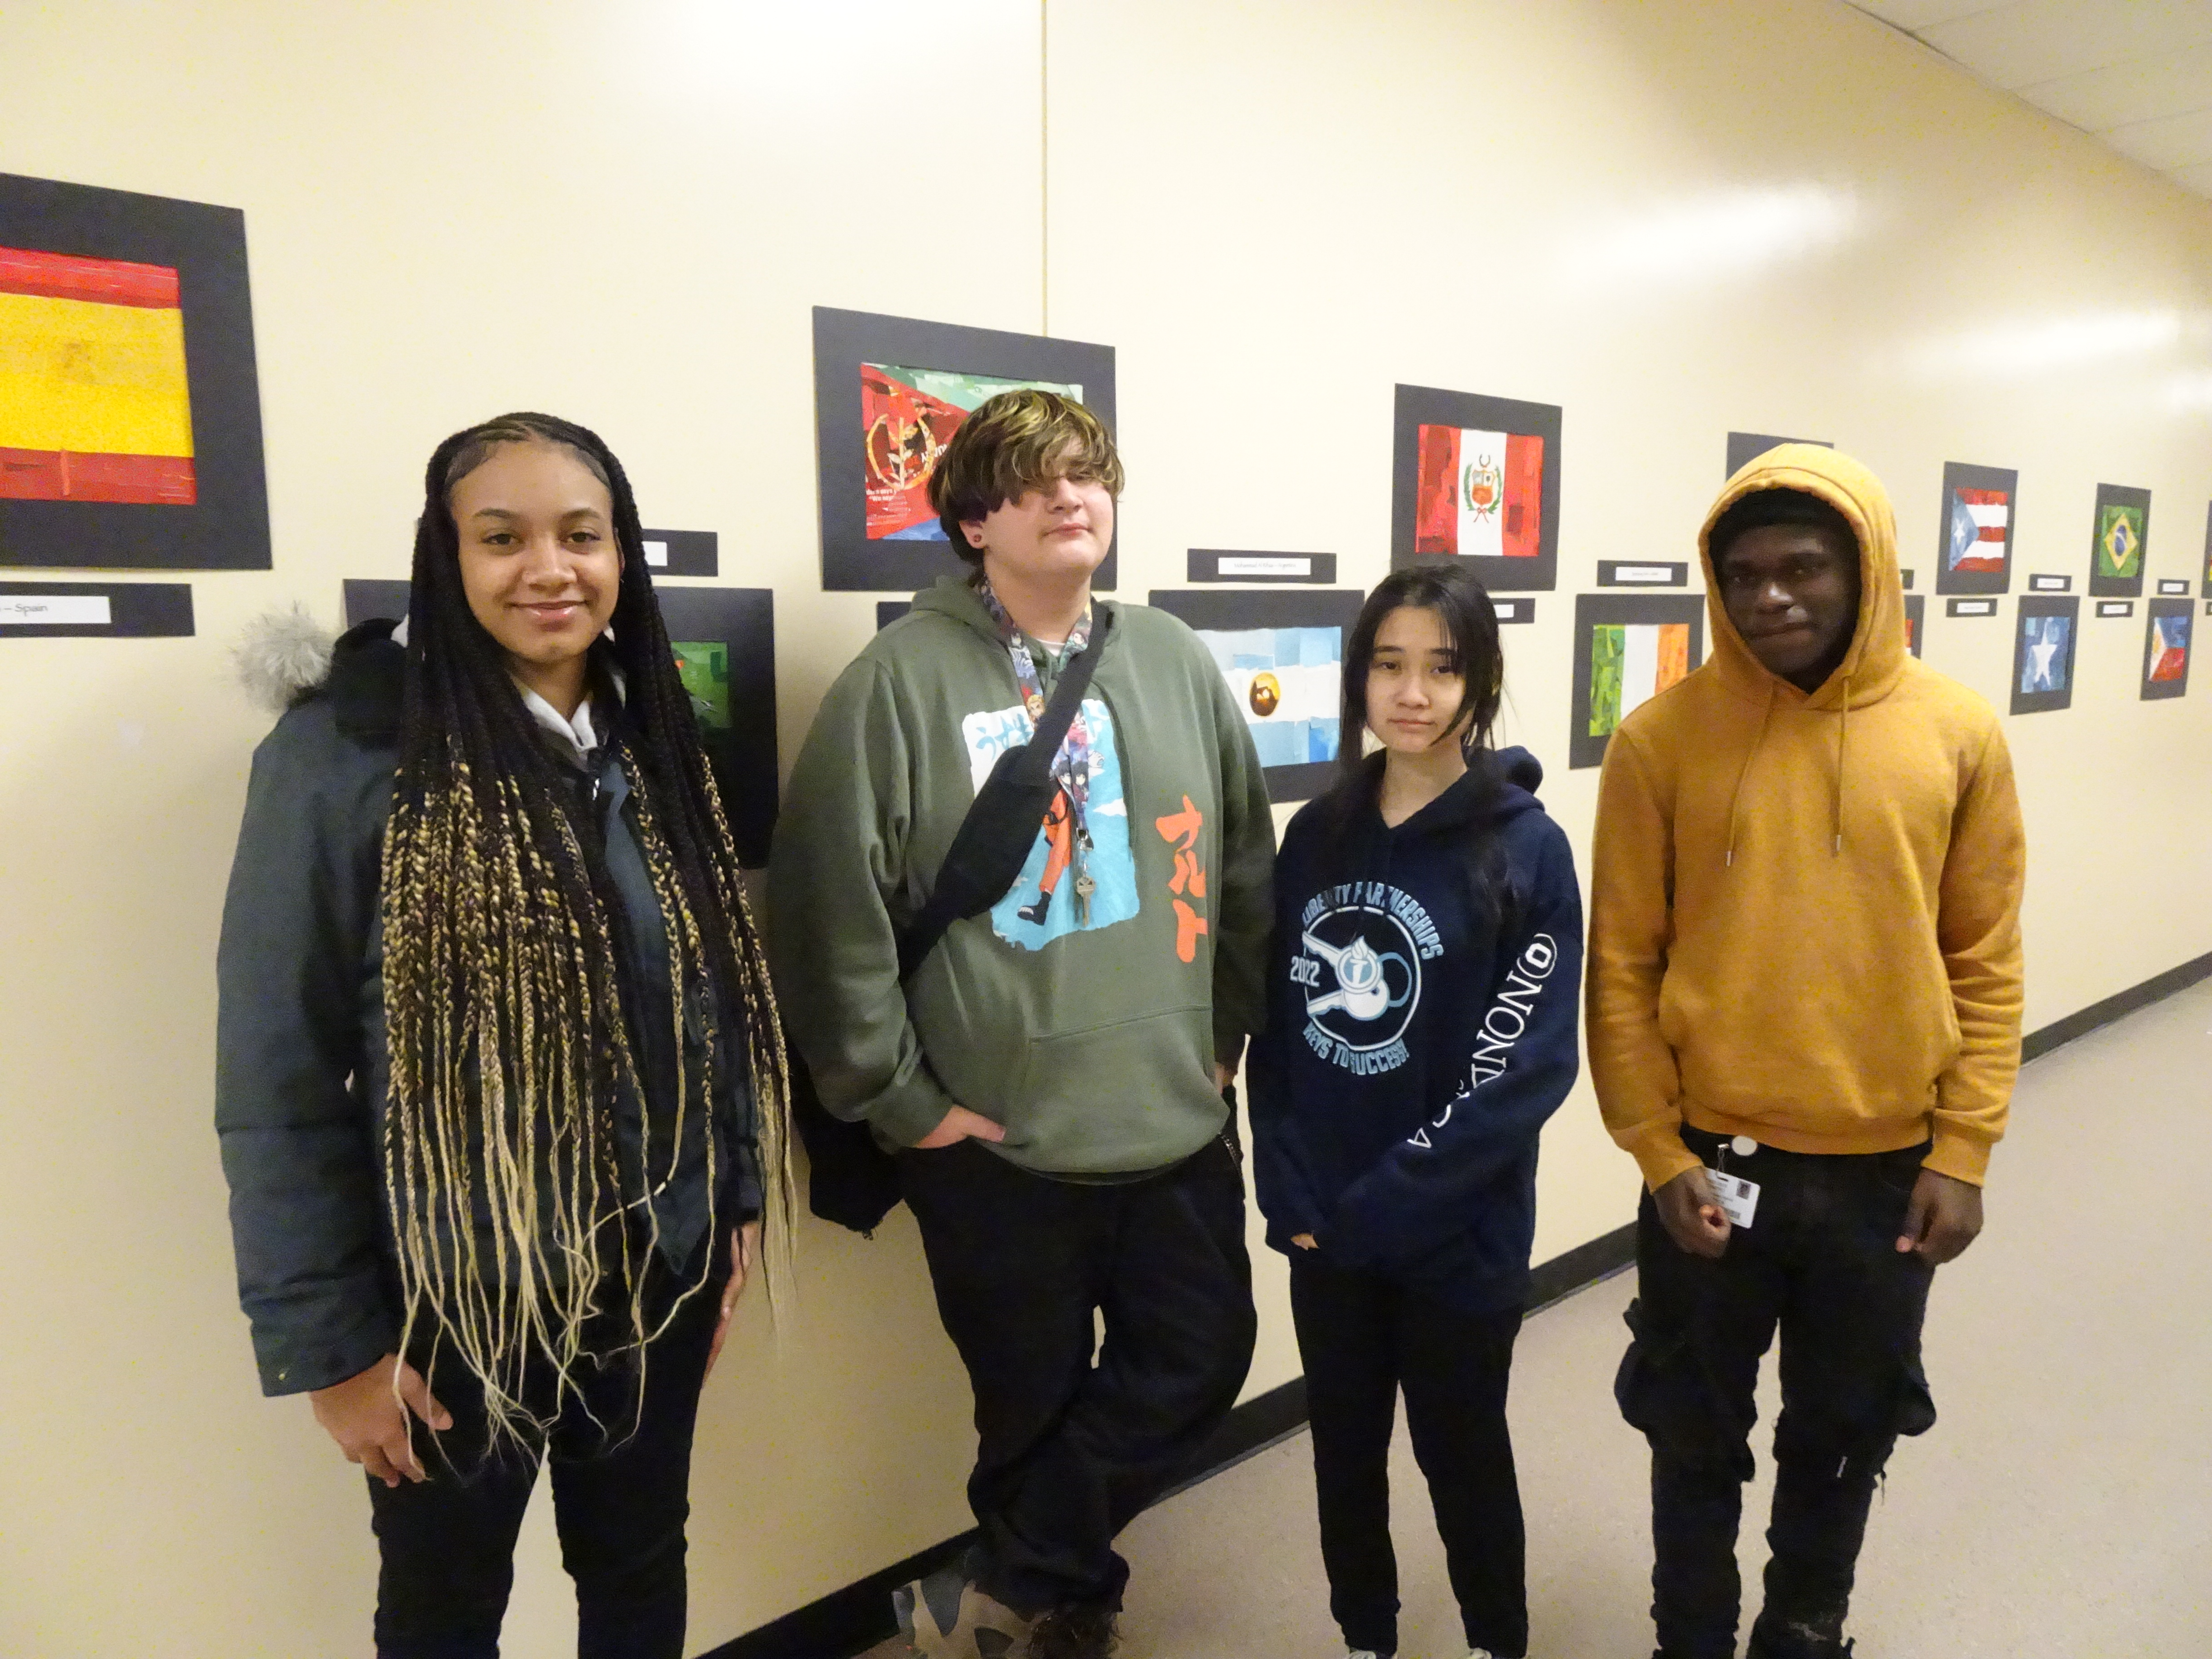 This is a photo of four PSLA students standing in a hallway in front of artwork hanging on the wall, individual student flag creations.